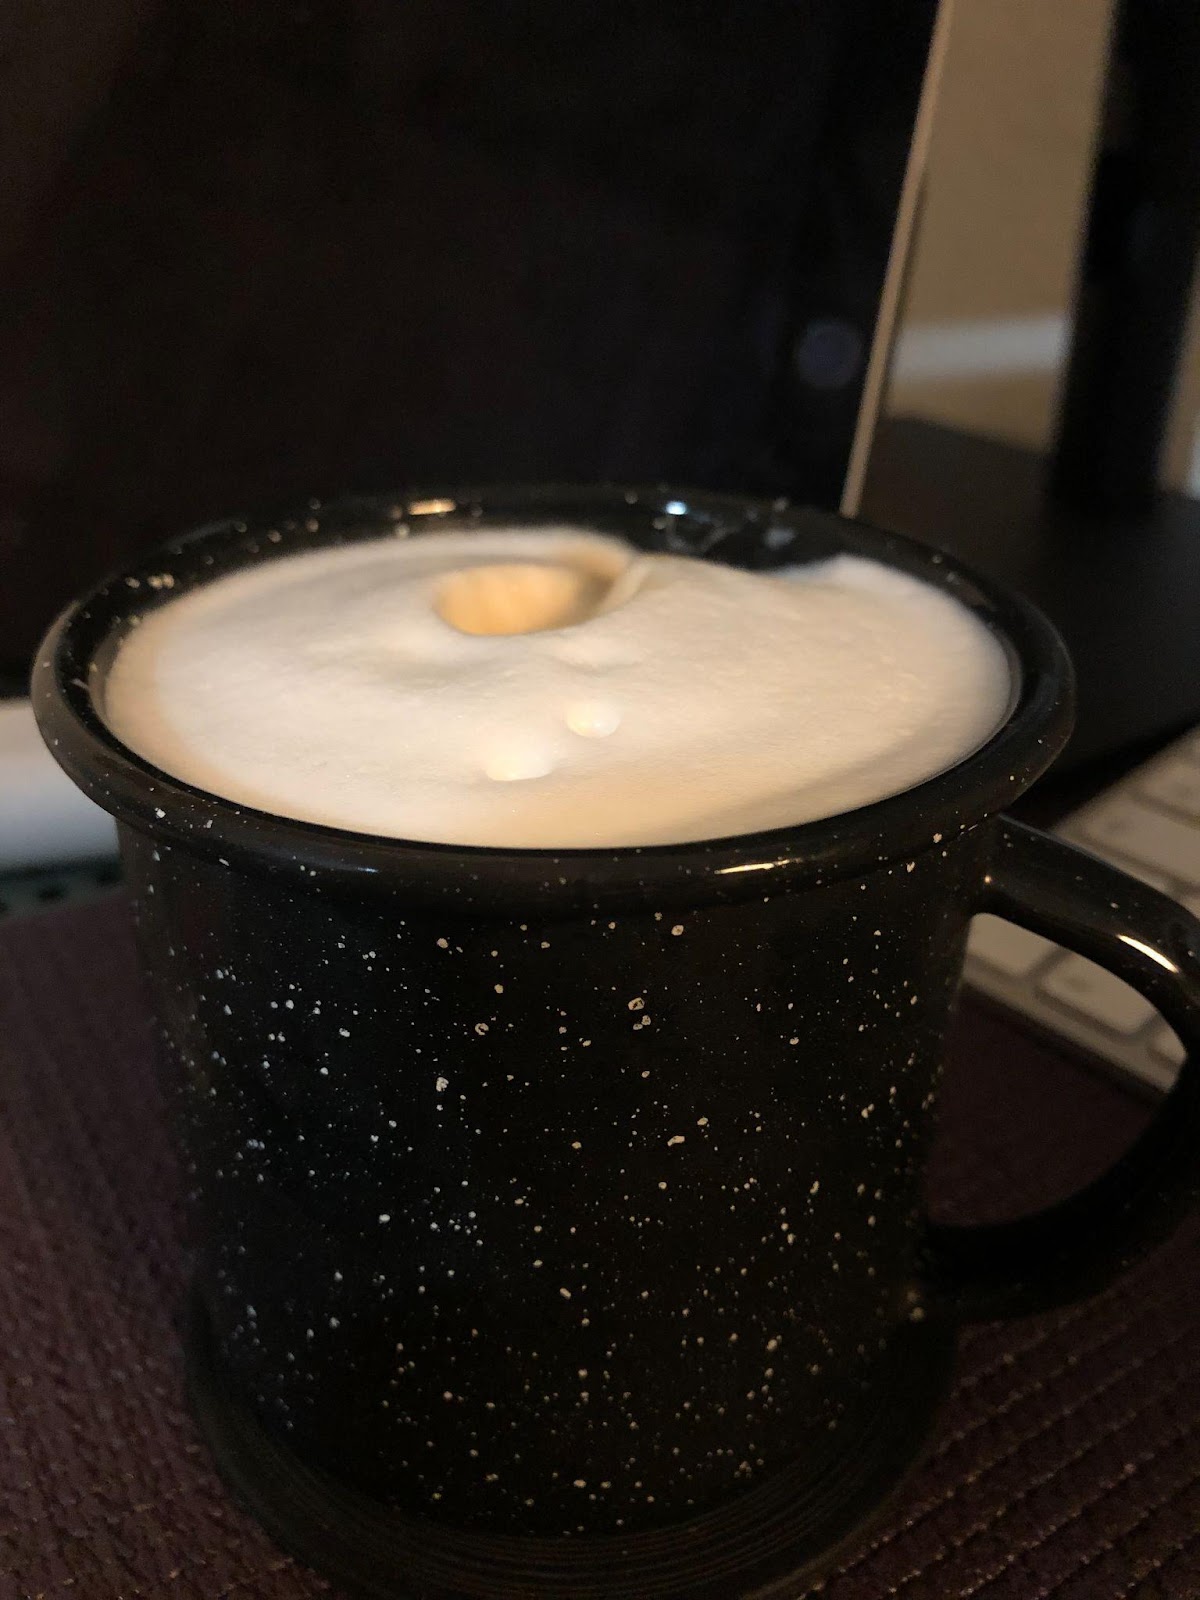 A second cup of liquid with froth on top